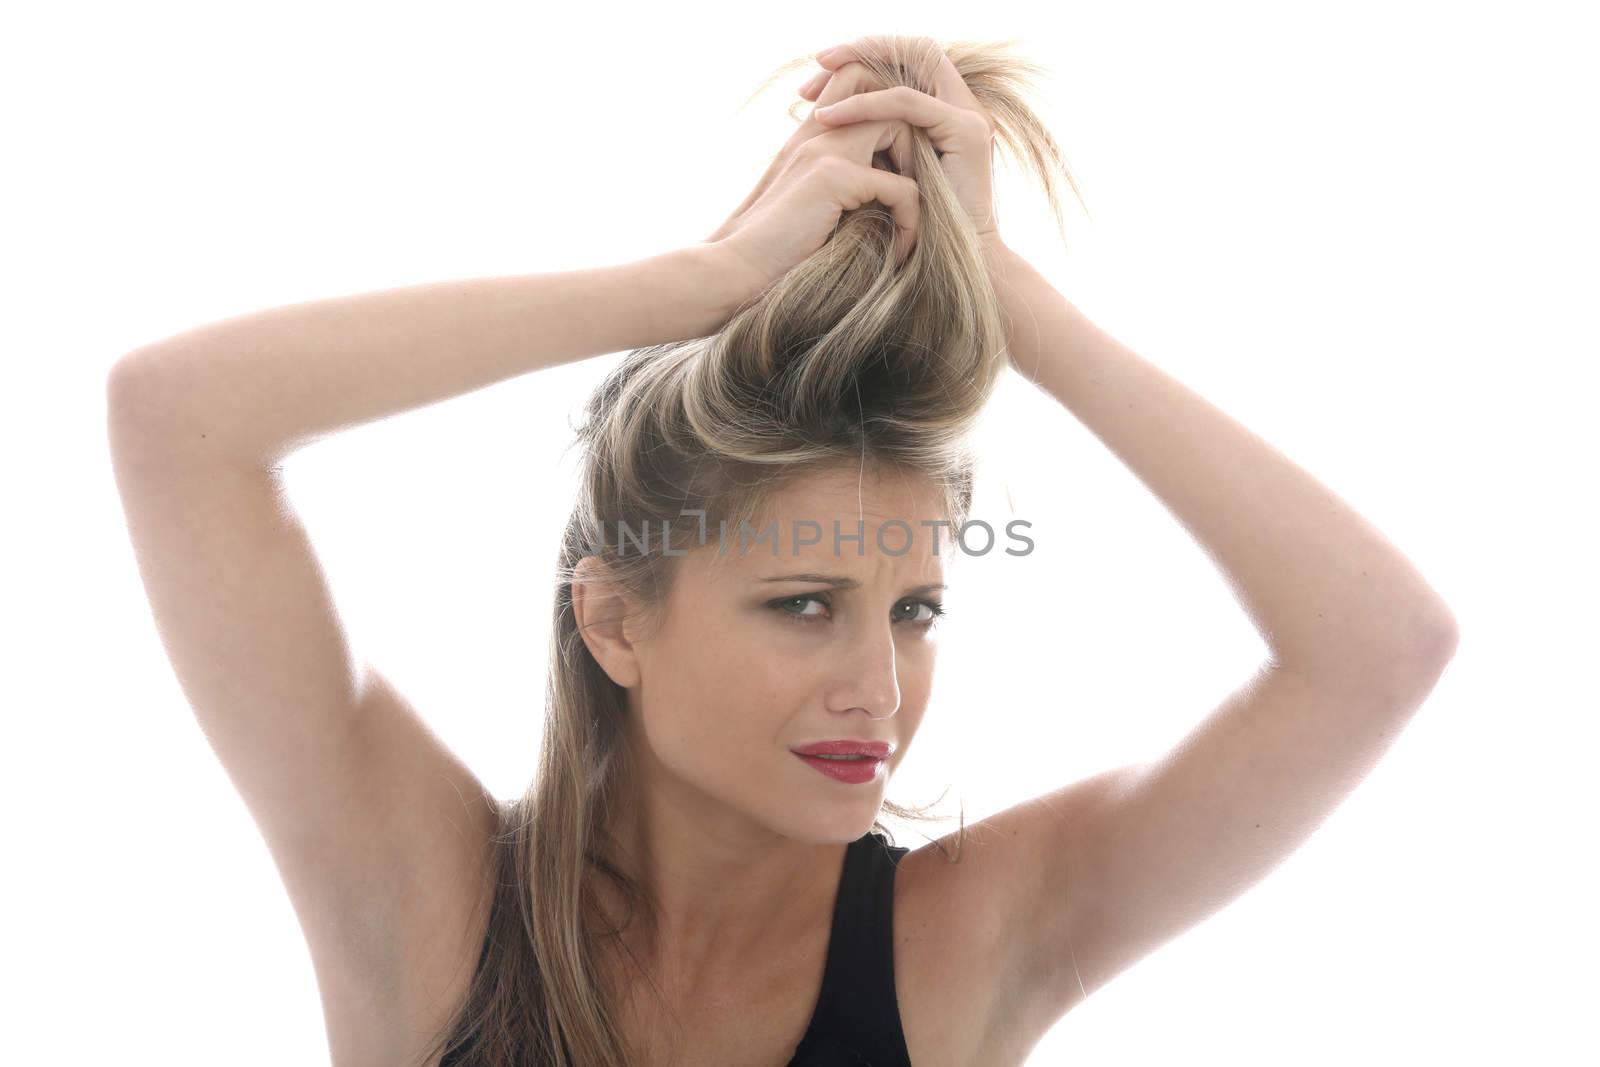 Model Released. Young Woman Styling Hair